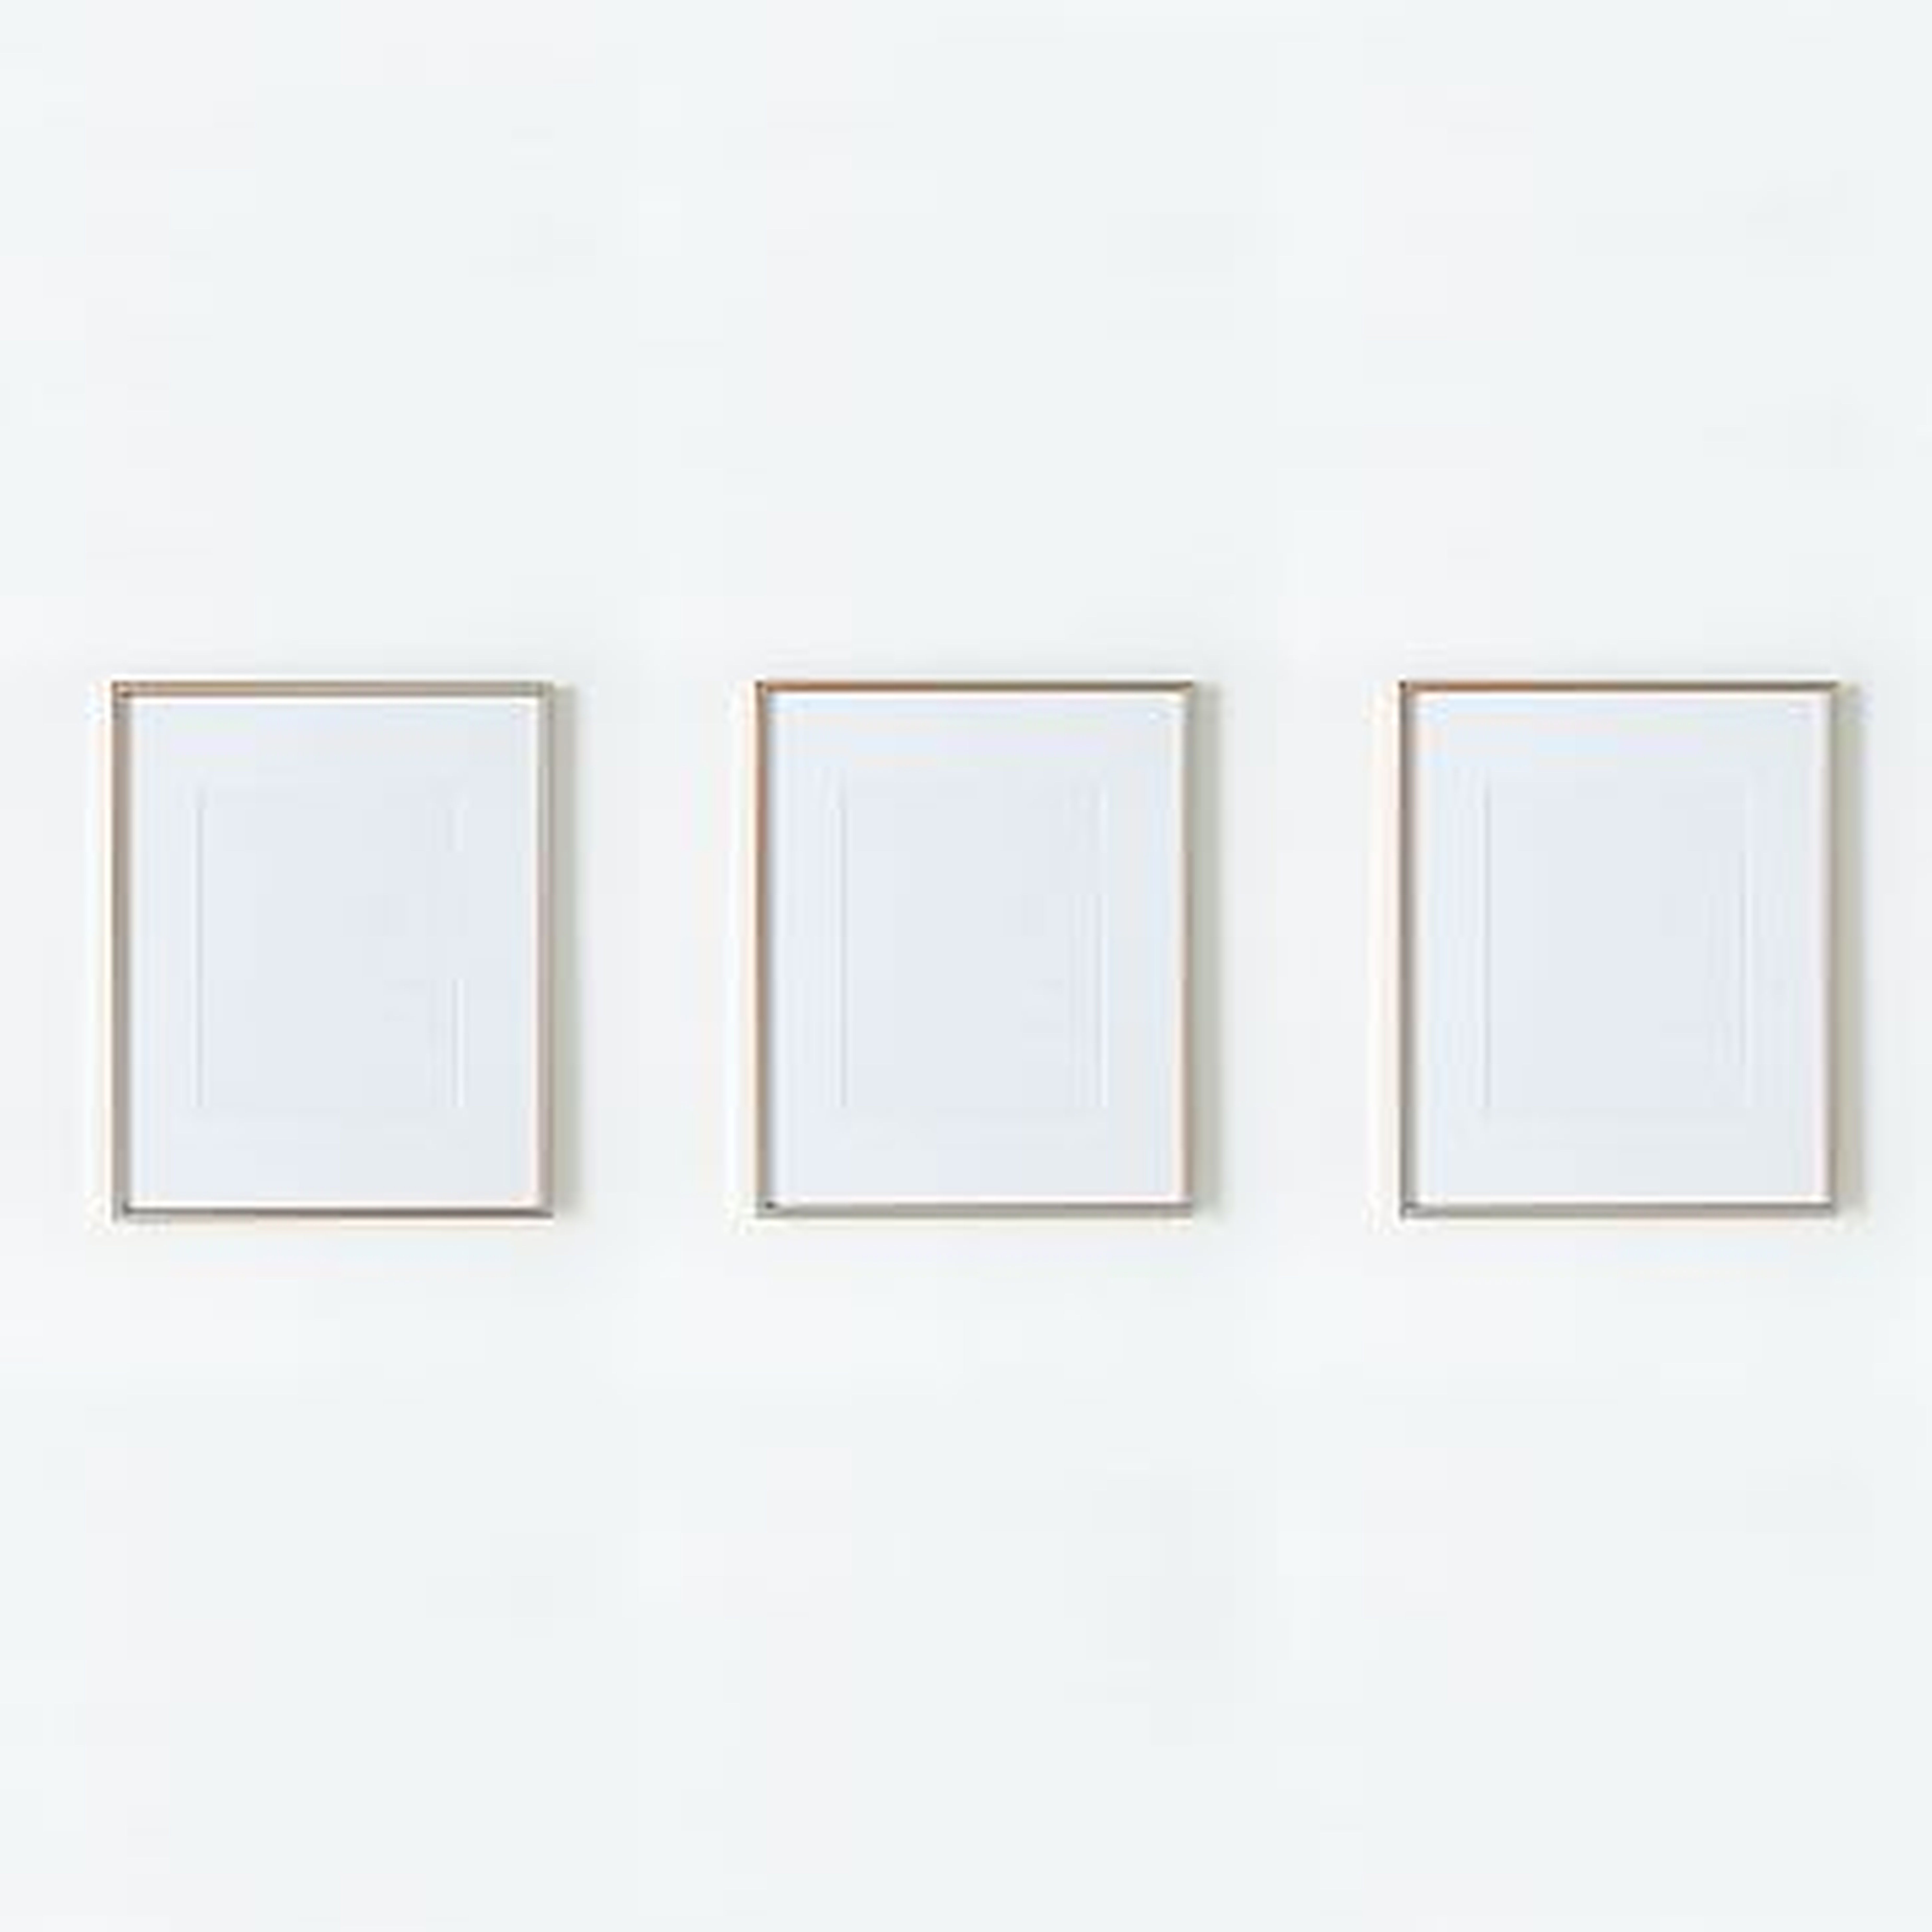 Gallery Frame, Rose Gold, Set of 3, 8" x 10" (13" x 16" without mat) - West Elm